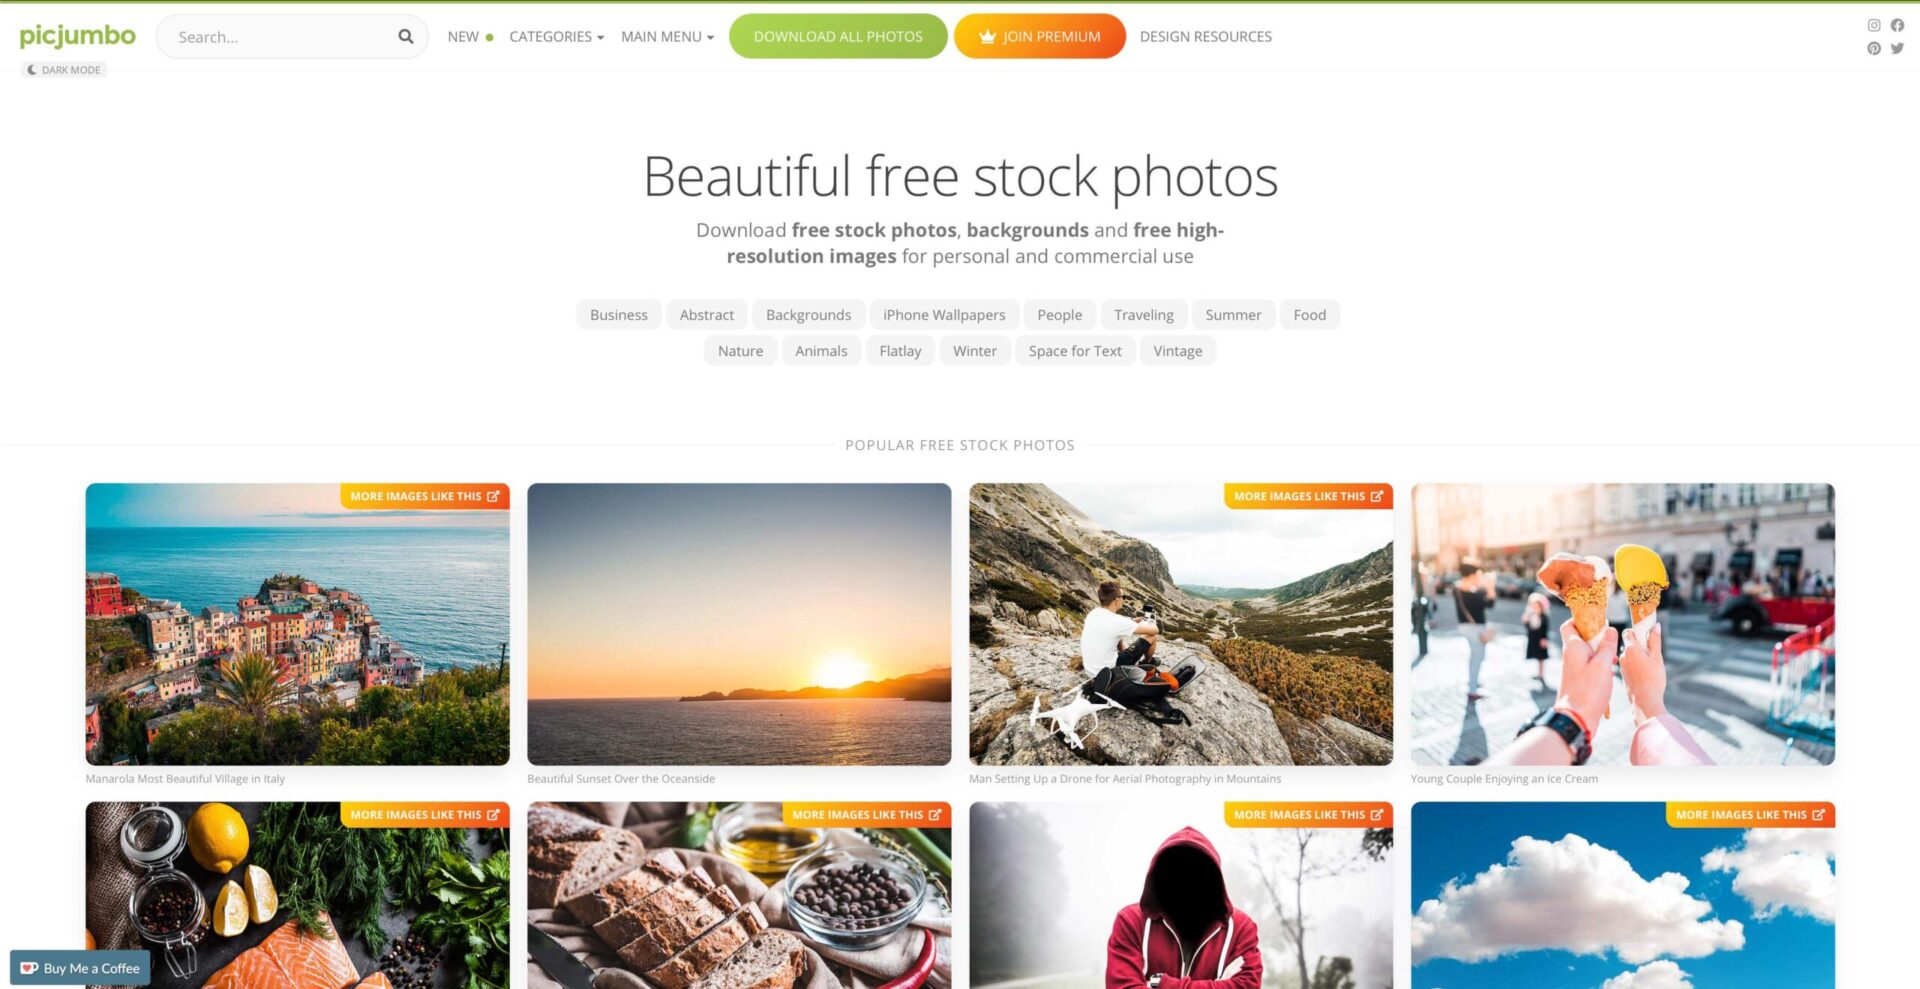 15 Free Stock Photography Websites You Should Be Using For Your Next Project - 08 Free Stock Websites picjumbo scaled 1